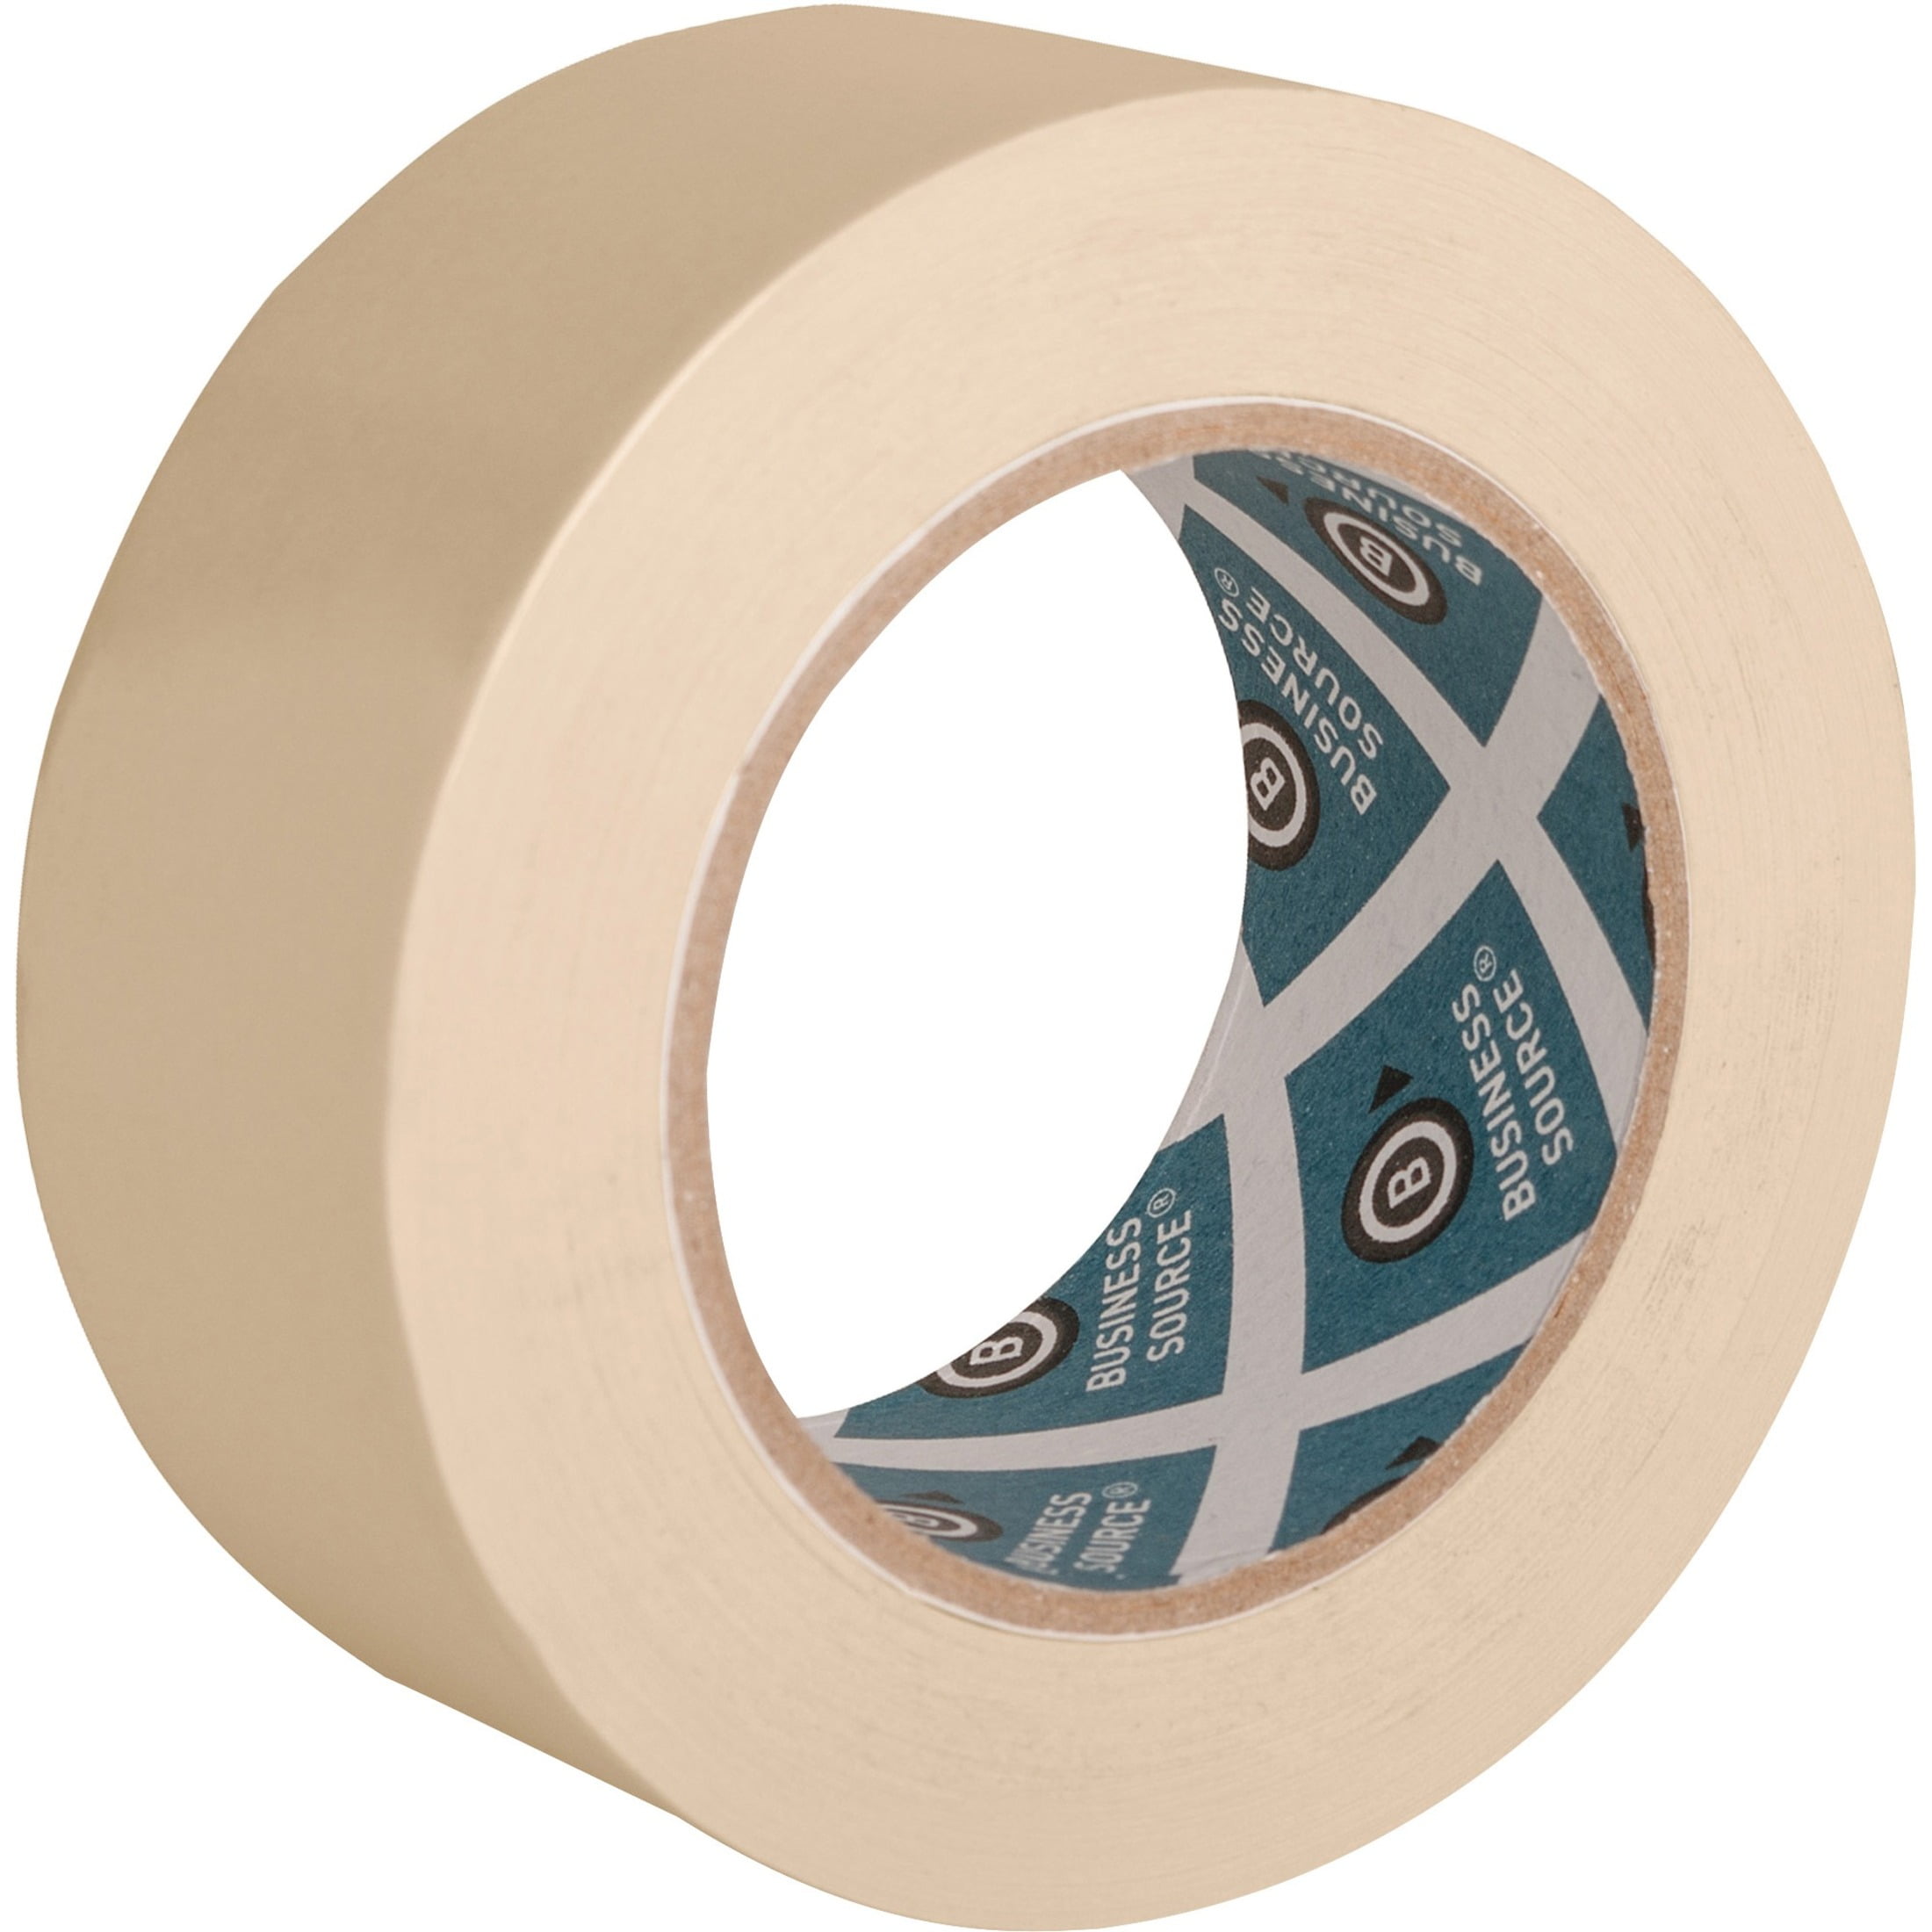 Uxcell 6Pcs 25mm 1 inch Wide 20m 21 Yards Masking Tape Painters Tape Rolls  Brown 